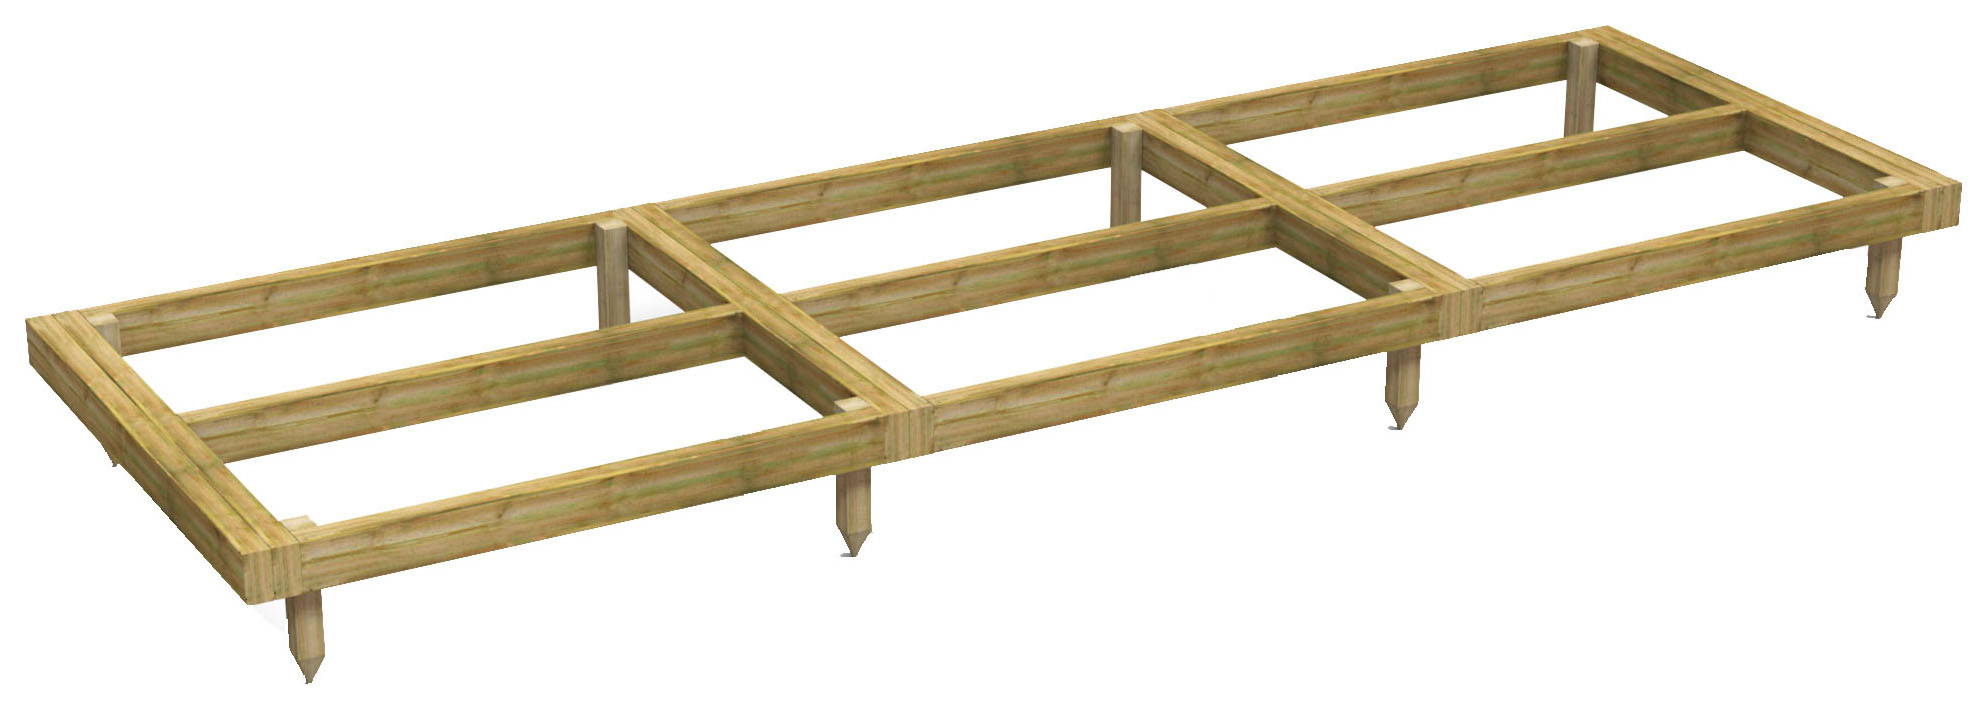 Power Sheds Pressure Treated Garden Building Base Kit - 12 x 4ft